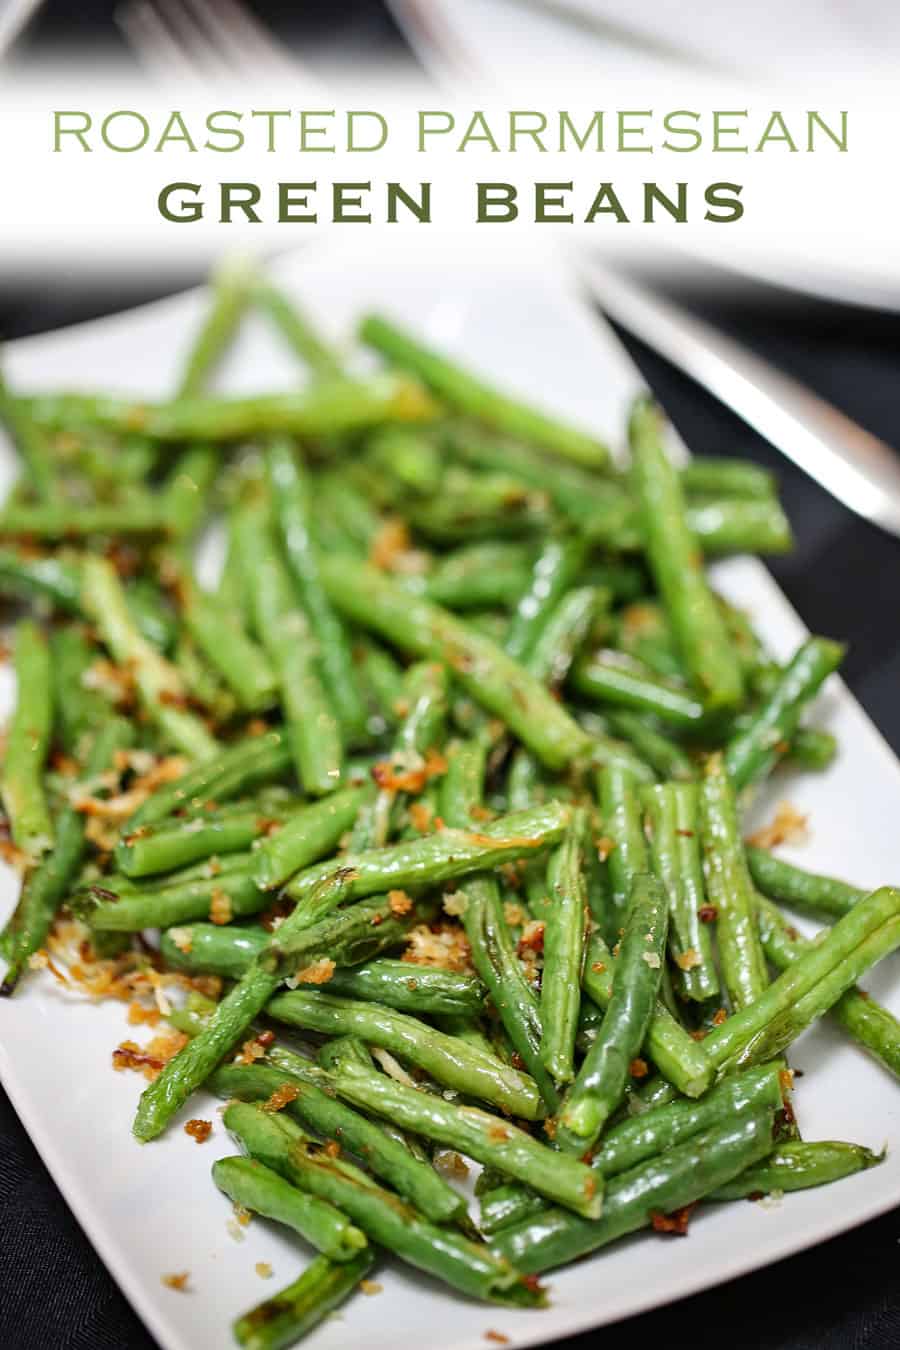 These Roasted Parmesan Green Beans are the most delicious way to enjoy fresh green beans. This simple vegetable recipe makes a great side dish to any meal!